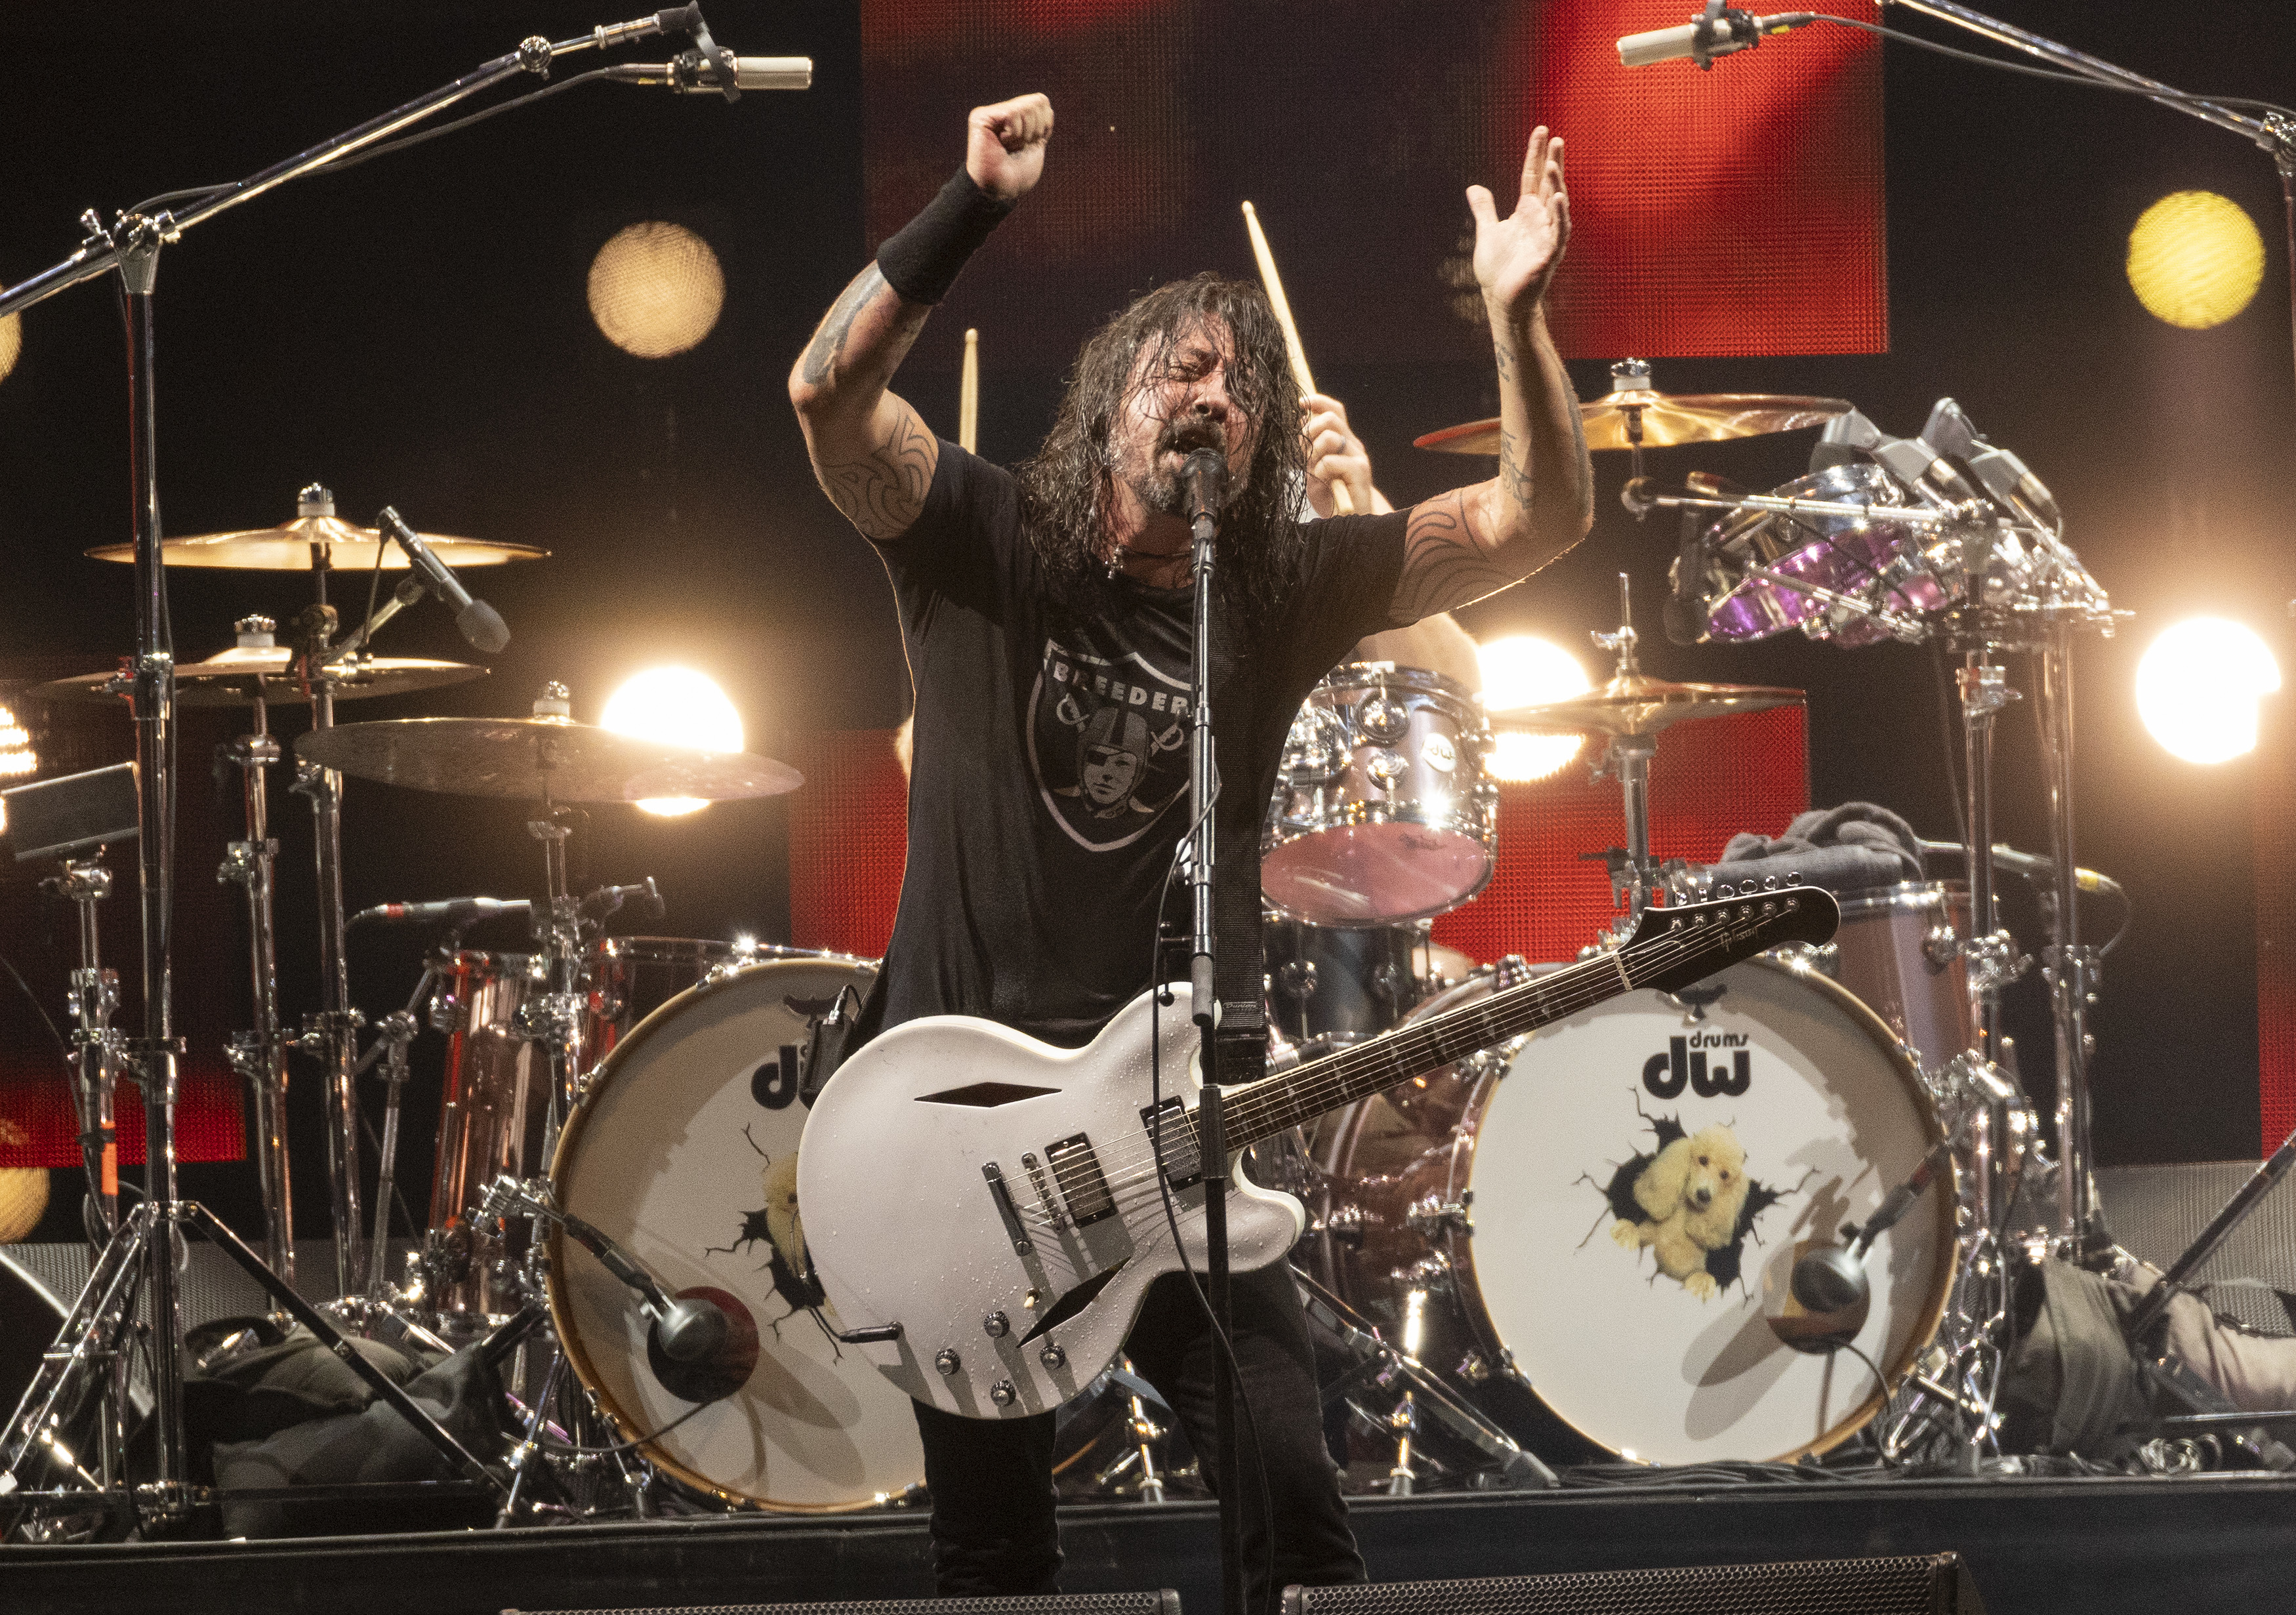 Dave Grohl performing on stage with a white electric guitar, drum set and cymbals in the background